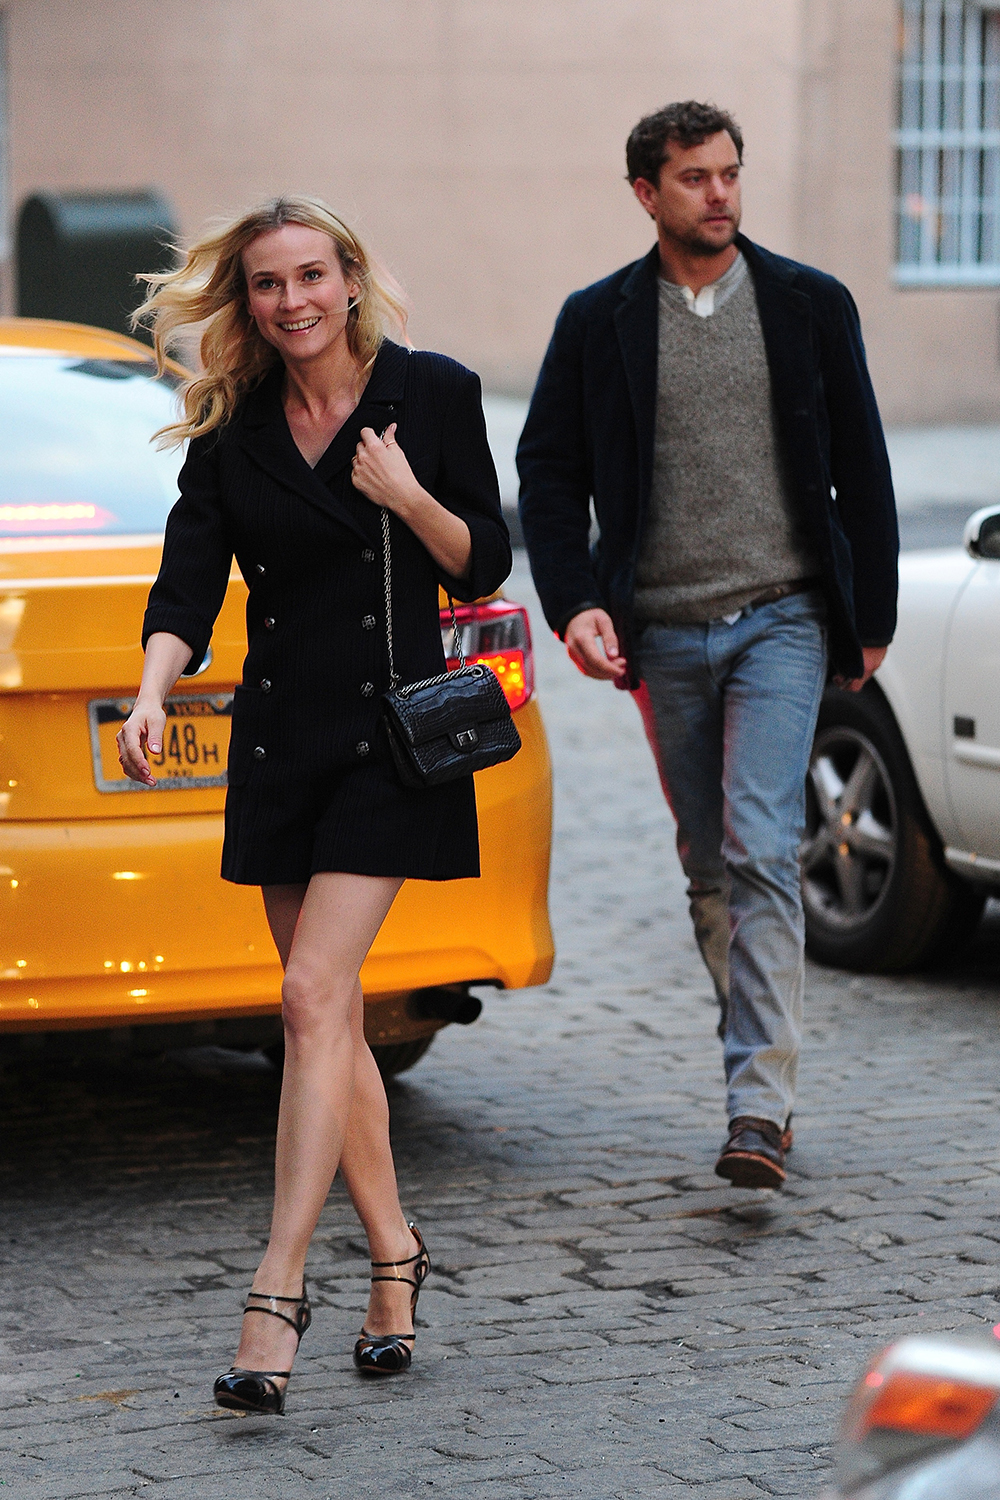 Diane Kruger and Joshua Jackson are seen in the West Village on March 26, 2013 in New York City.